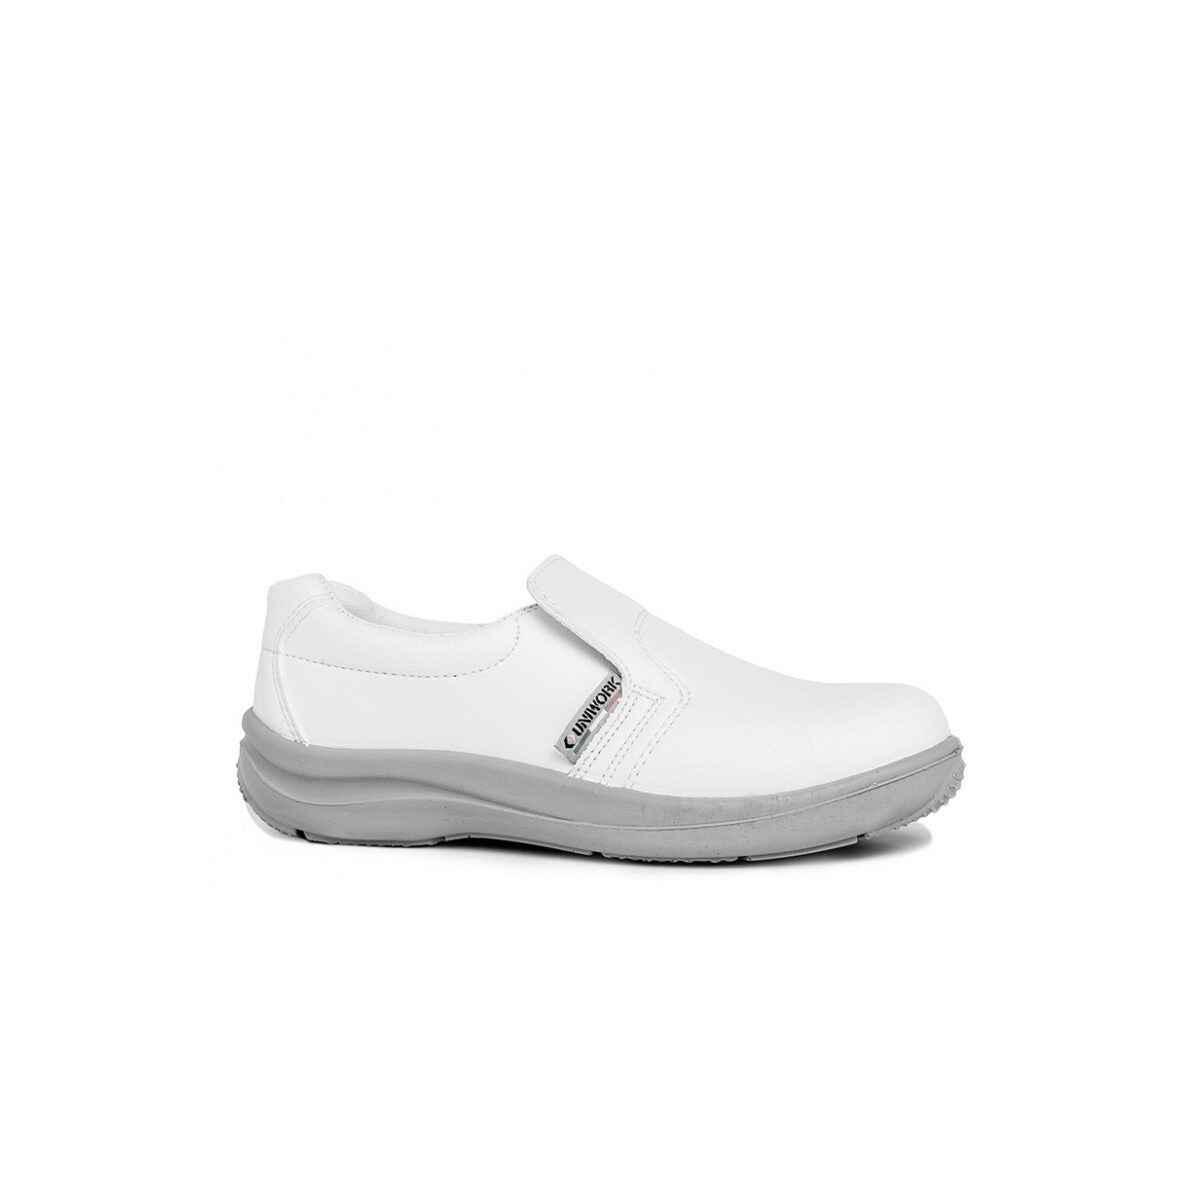 CHAUSSURE SECURIT  MIXTE BLANC TAILLE 45